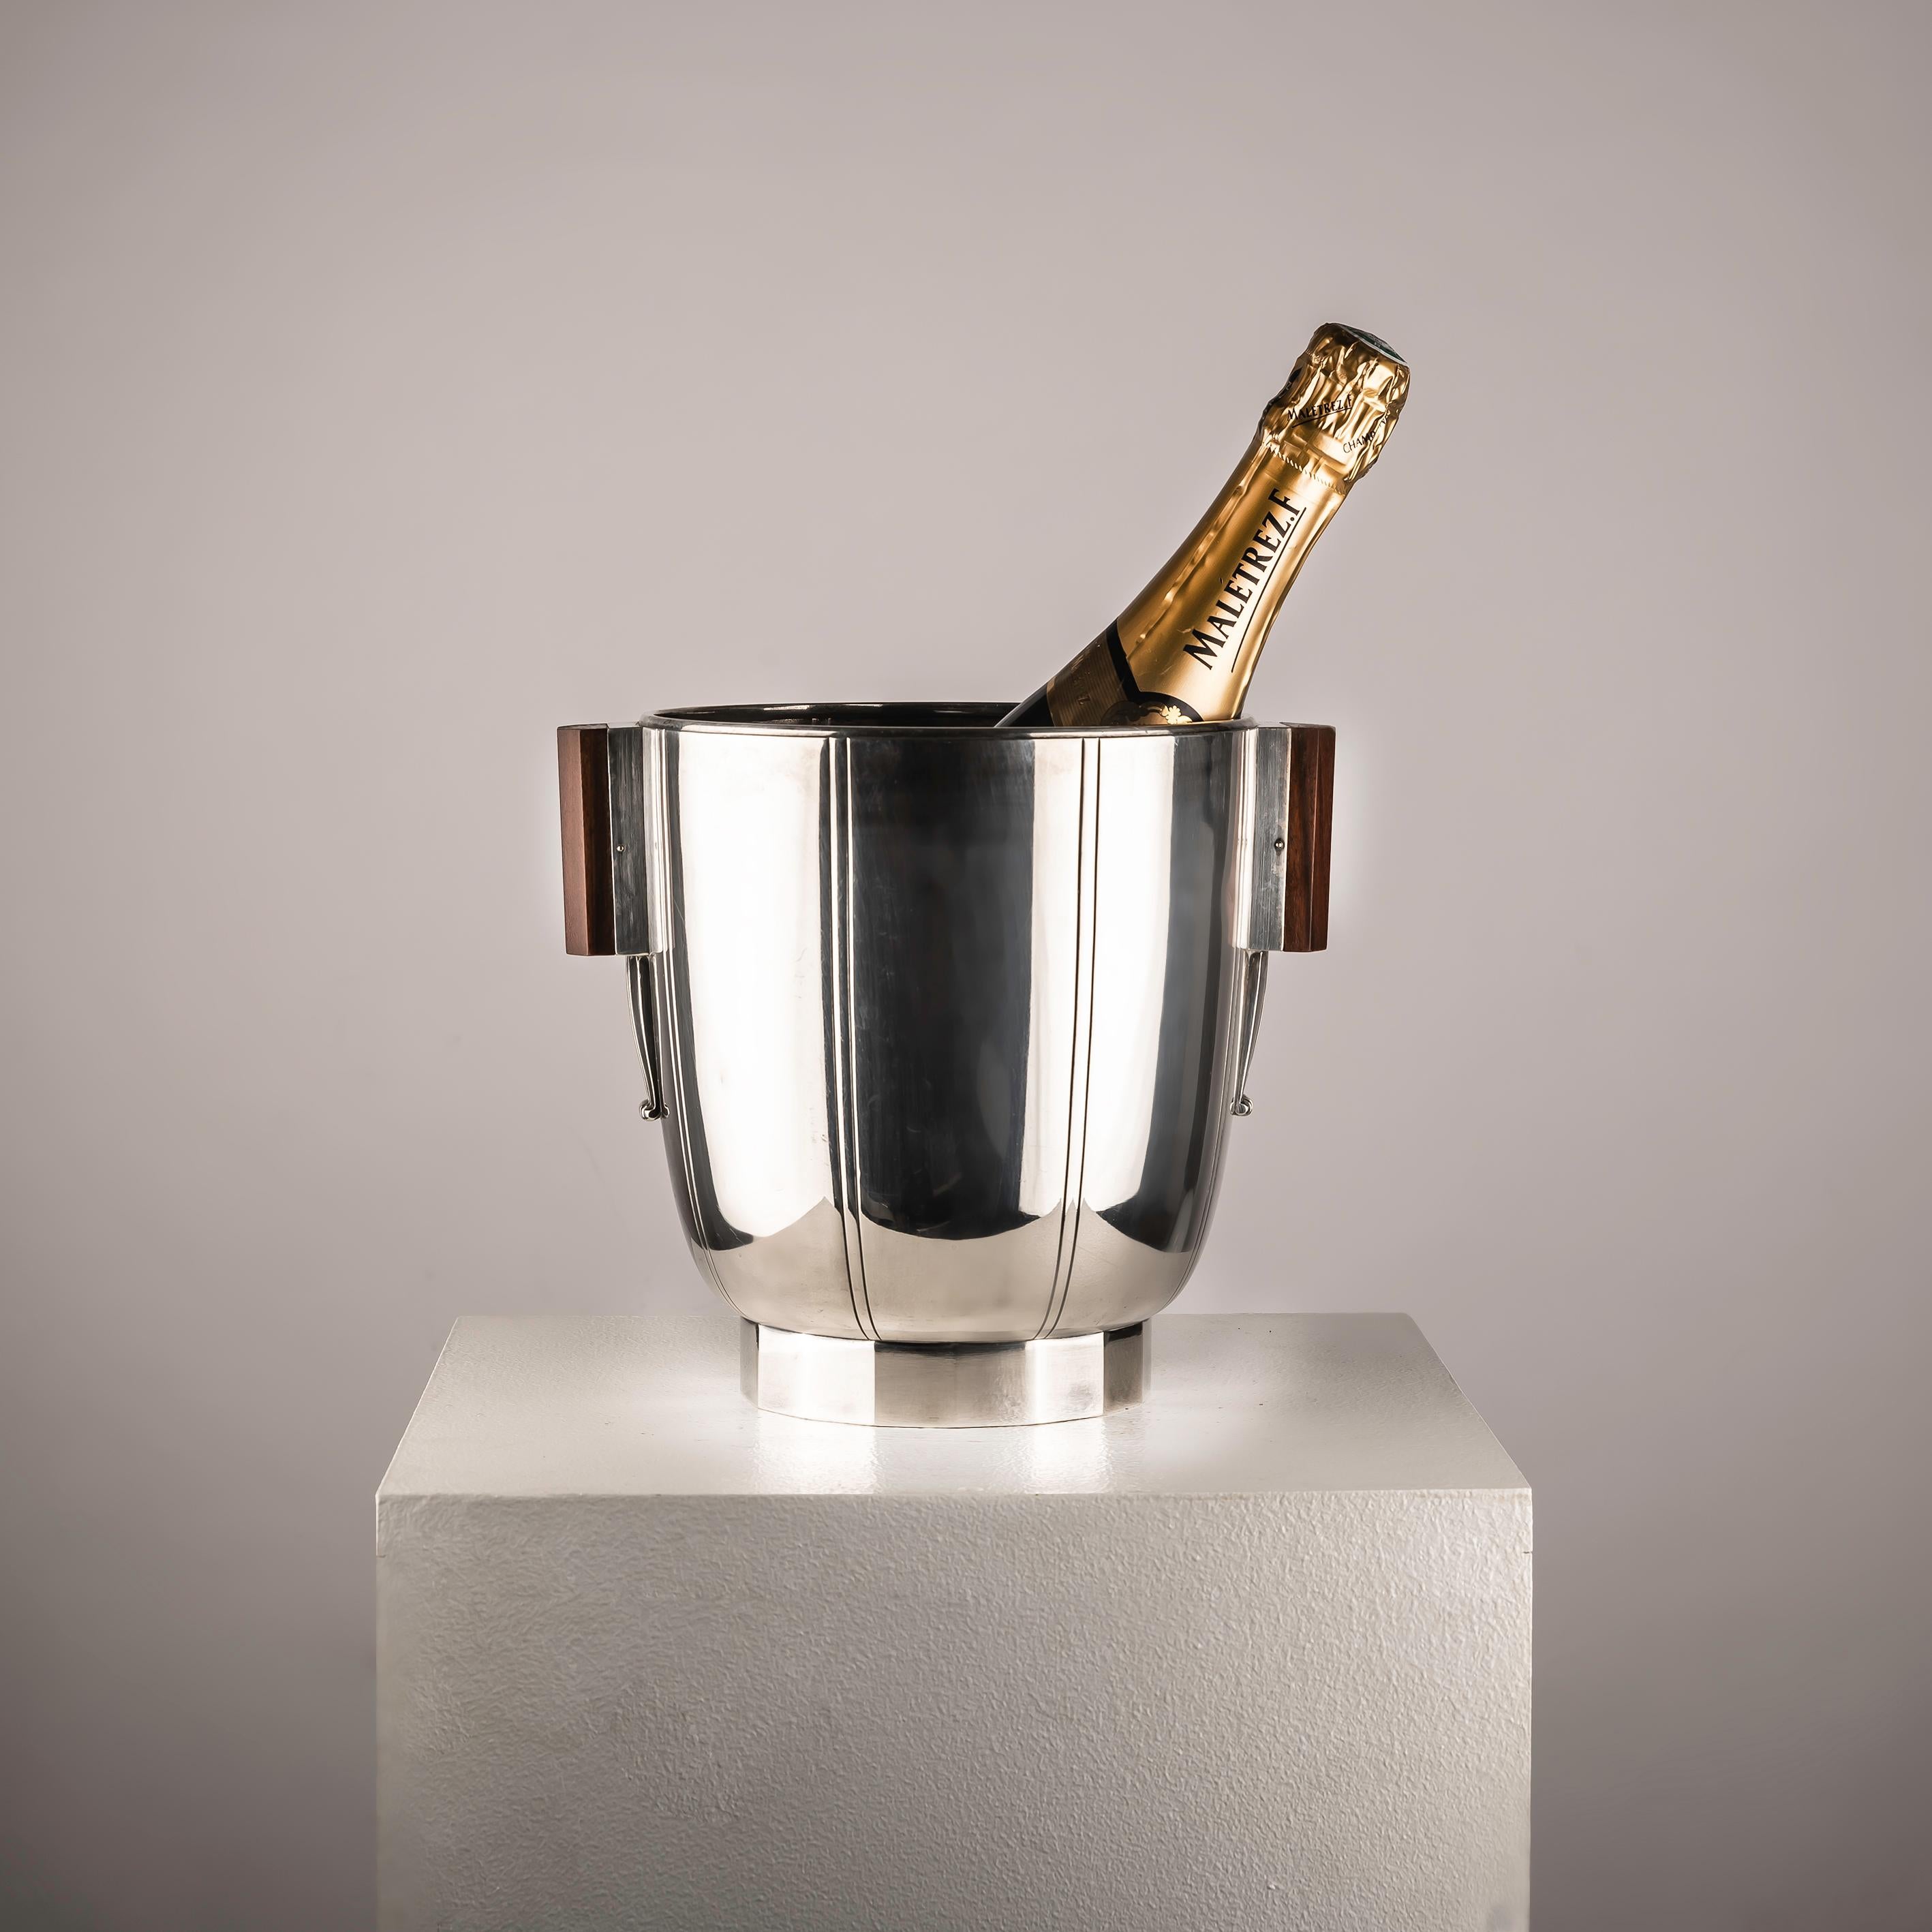 This French Art Deco Wine Cooler from the 1930s is a truly exceptional piece that exudes elegance and sophistication, making it both unique and special. Crafted from silvered metal with exquisite wood handles, it embodies the epitome of Art Deco